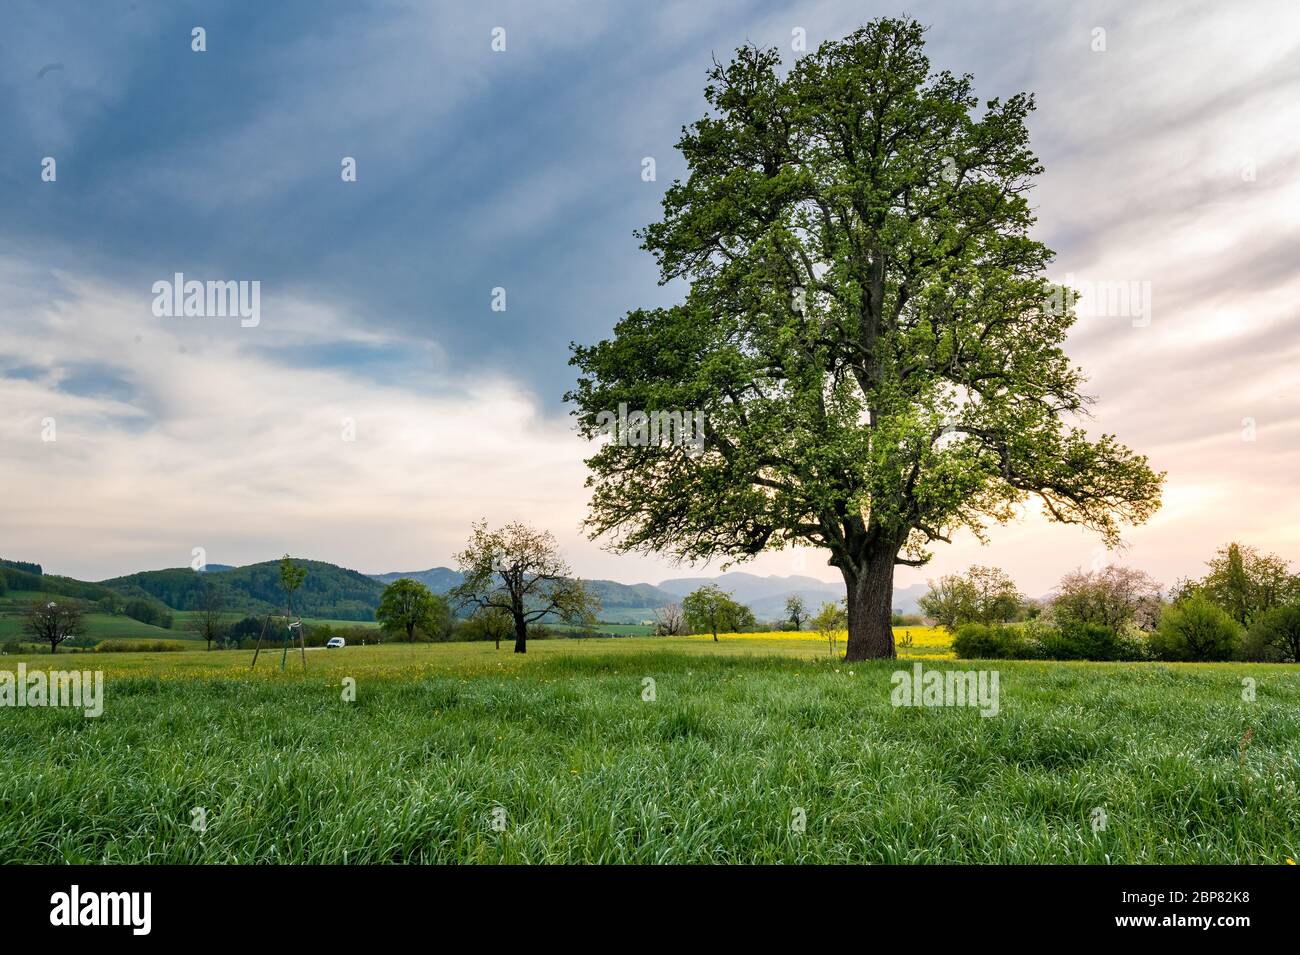 Beautiful spring landscape with a giant pear tree and a meadow with blooming dandelions Stock Photo